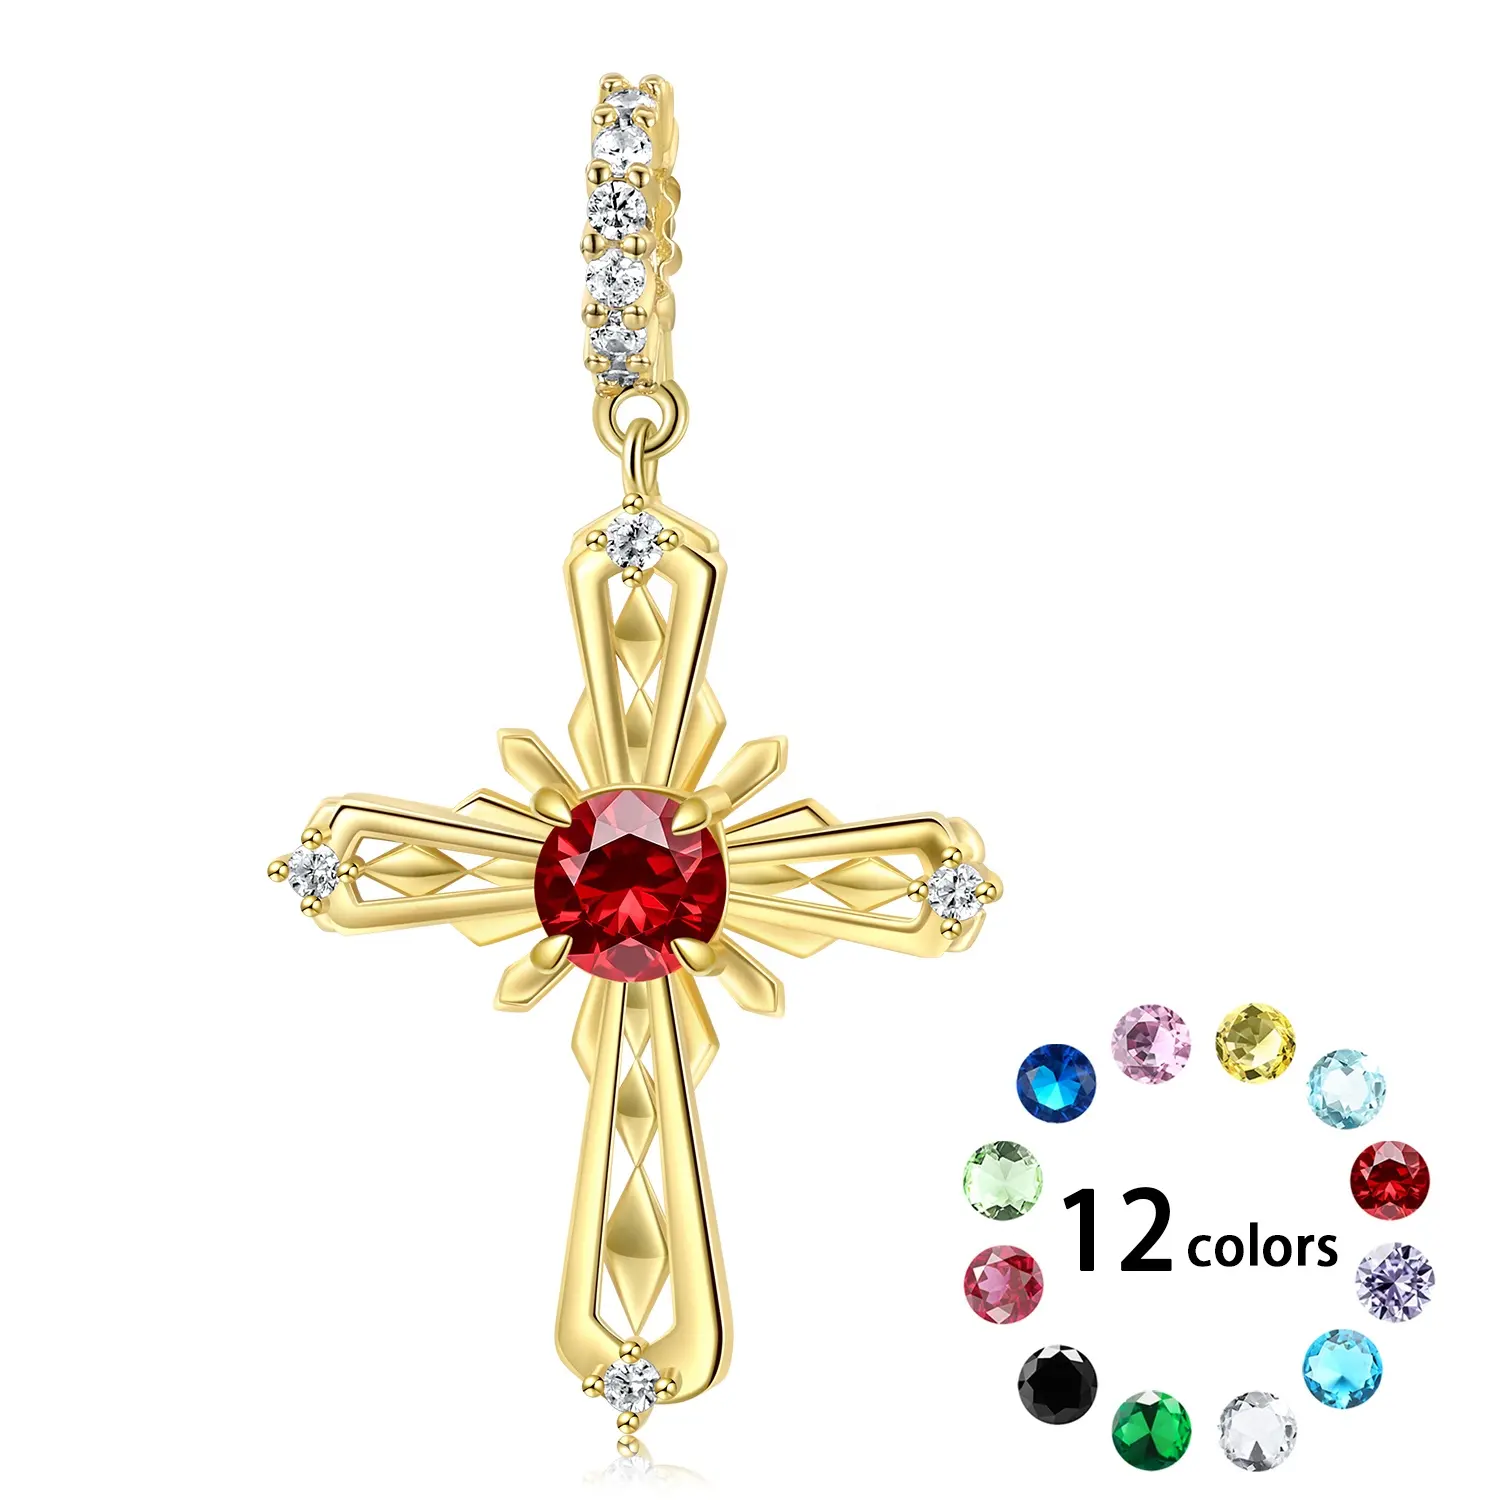 Vintage Cross Pendant Authentic 925 Sterling Silver Birthstone Zirconia Charm Beads For Amazon Women Bracelet Necklace Jewelry